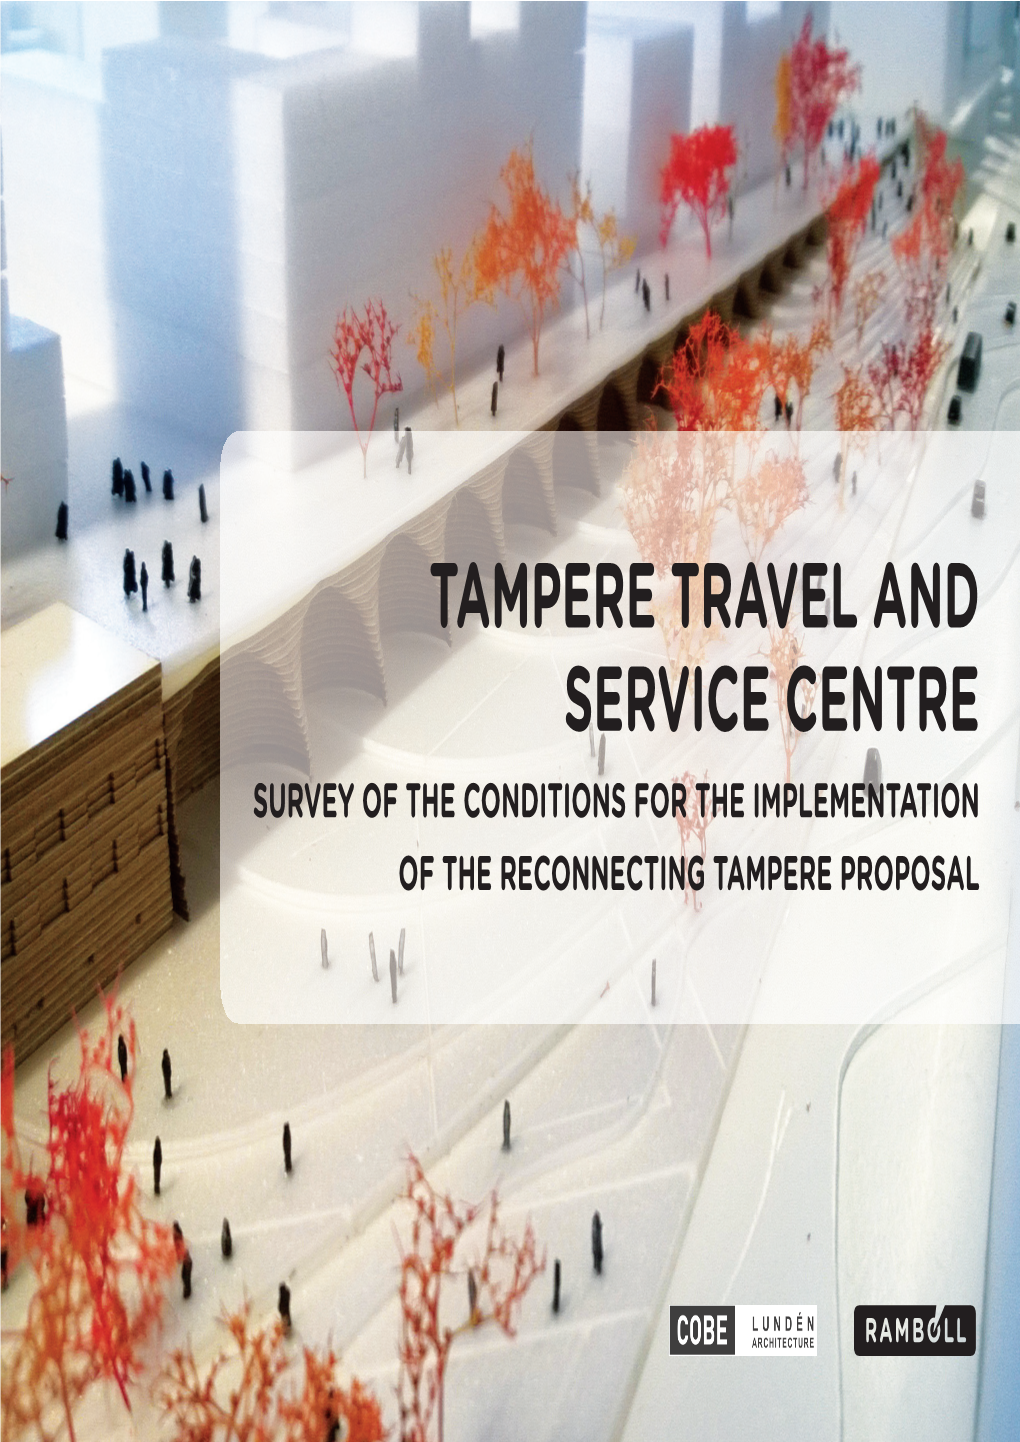 Tampere Travel and Service Centre - Reconnecting Tampere – Survey of the Conditions for the Implementation of the Reconnecting Tampere